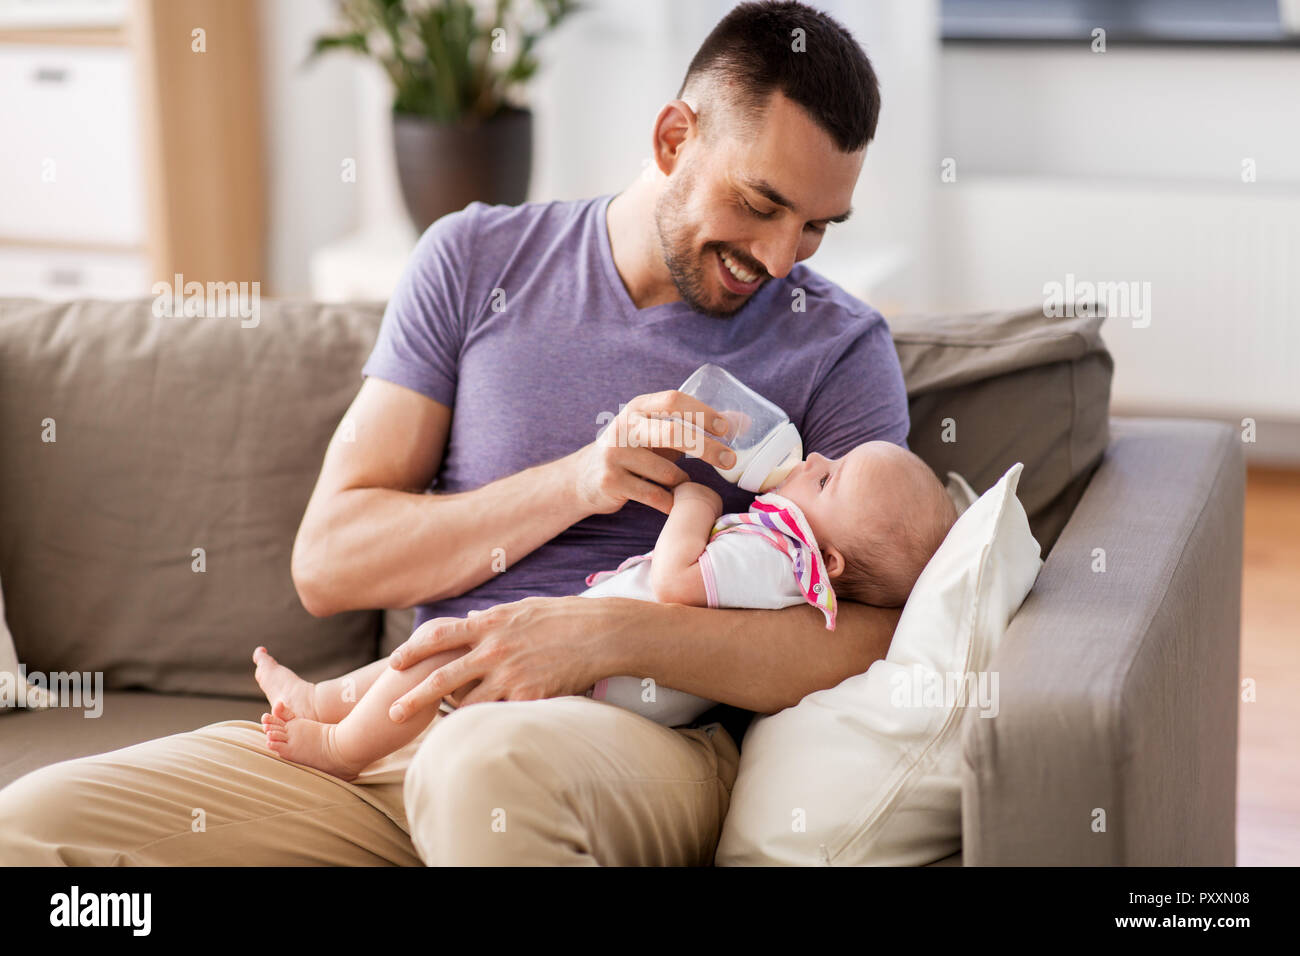 father feeding baby daughter from bottle at home Stock Photo